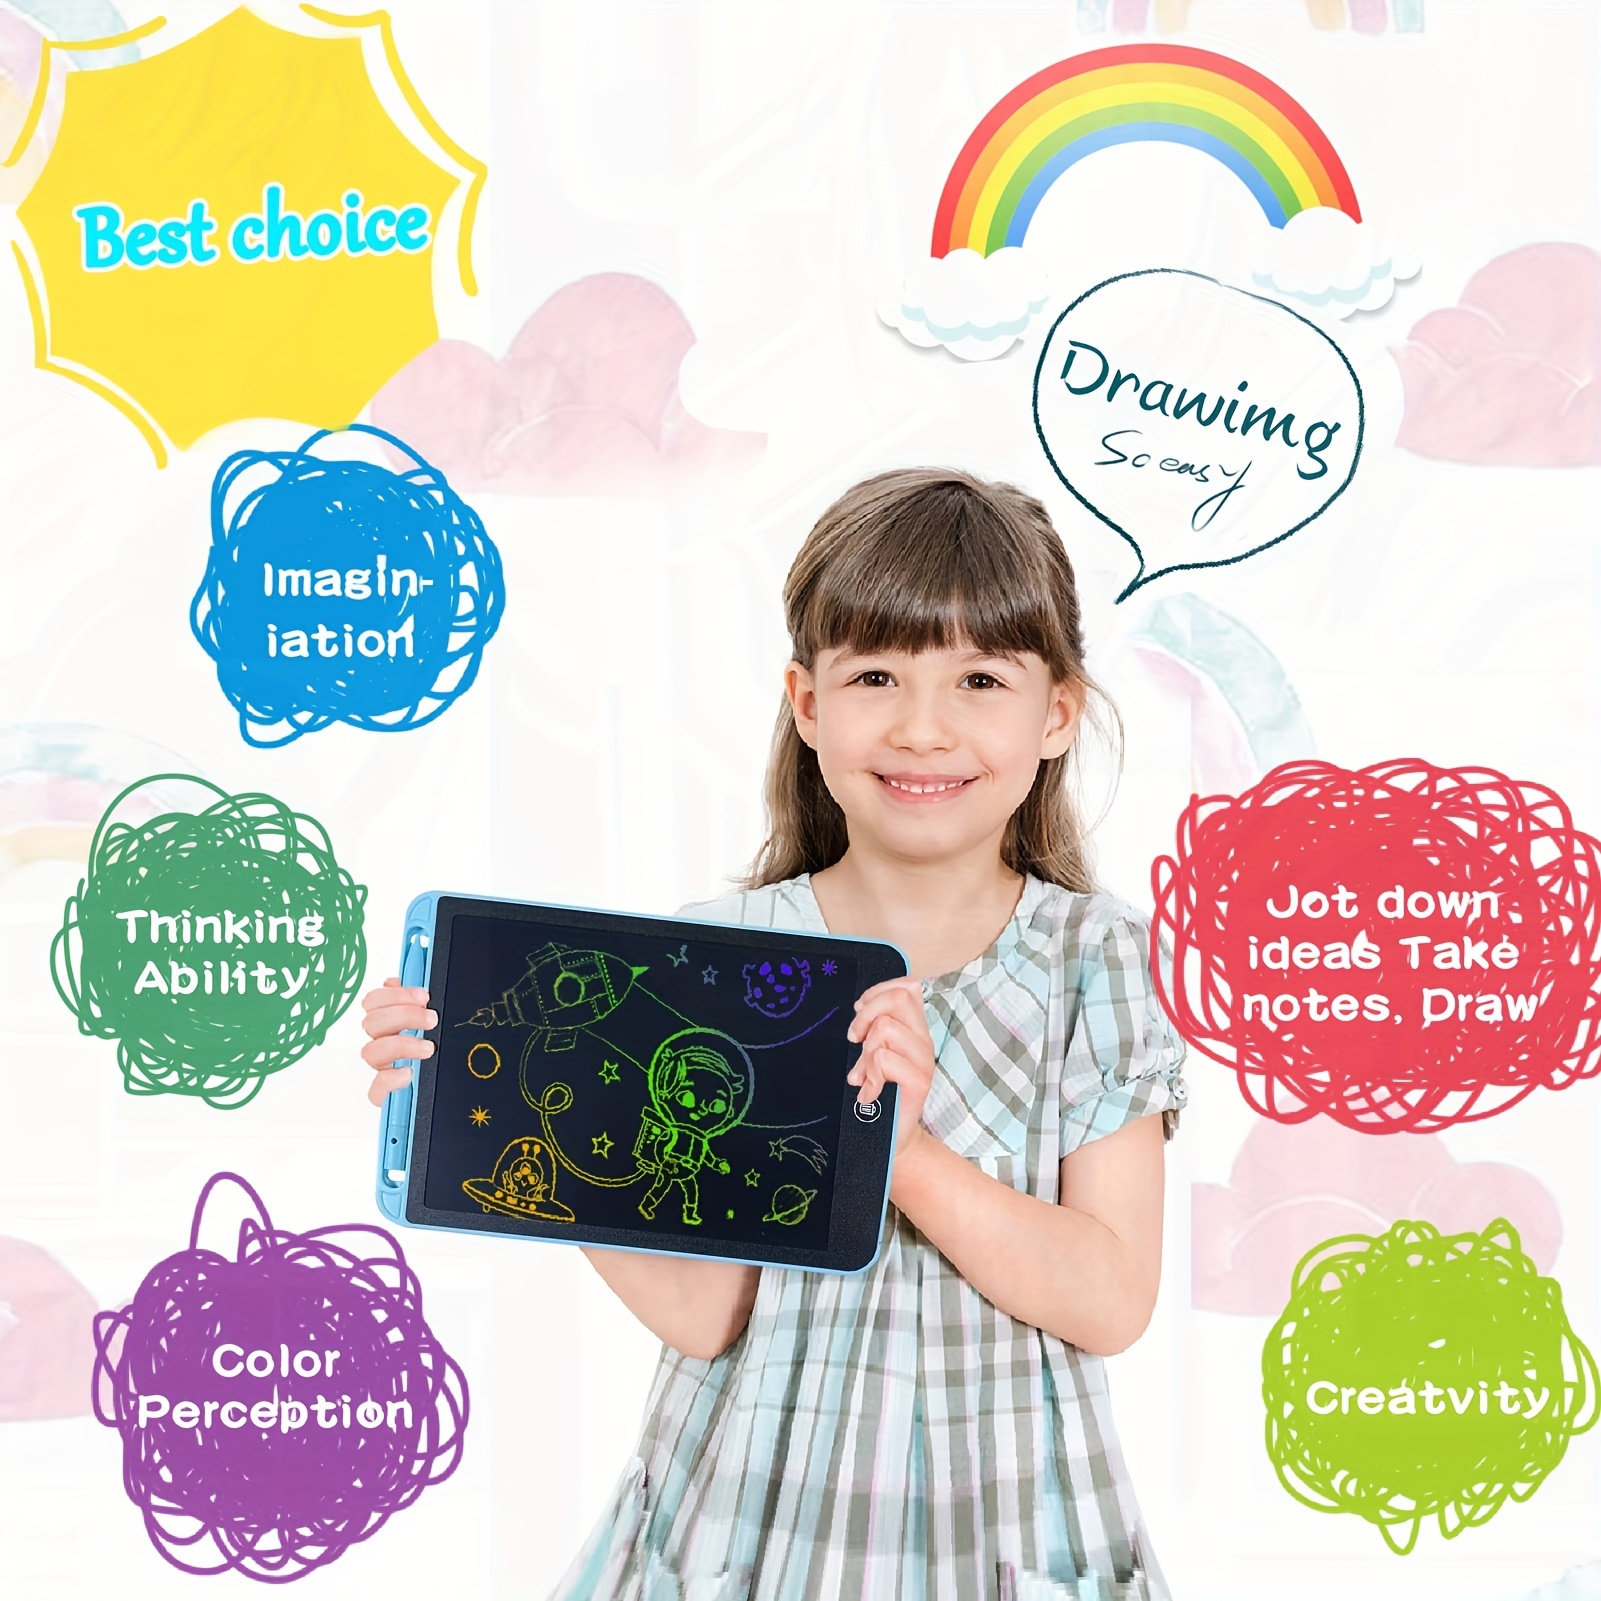 8 5 12 inch magic flat drawing tablet learning and creativity lcd drawing tablet for kids developing fine motor skills interactive drawing tablet for kids great gift for kids